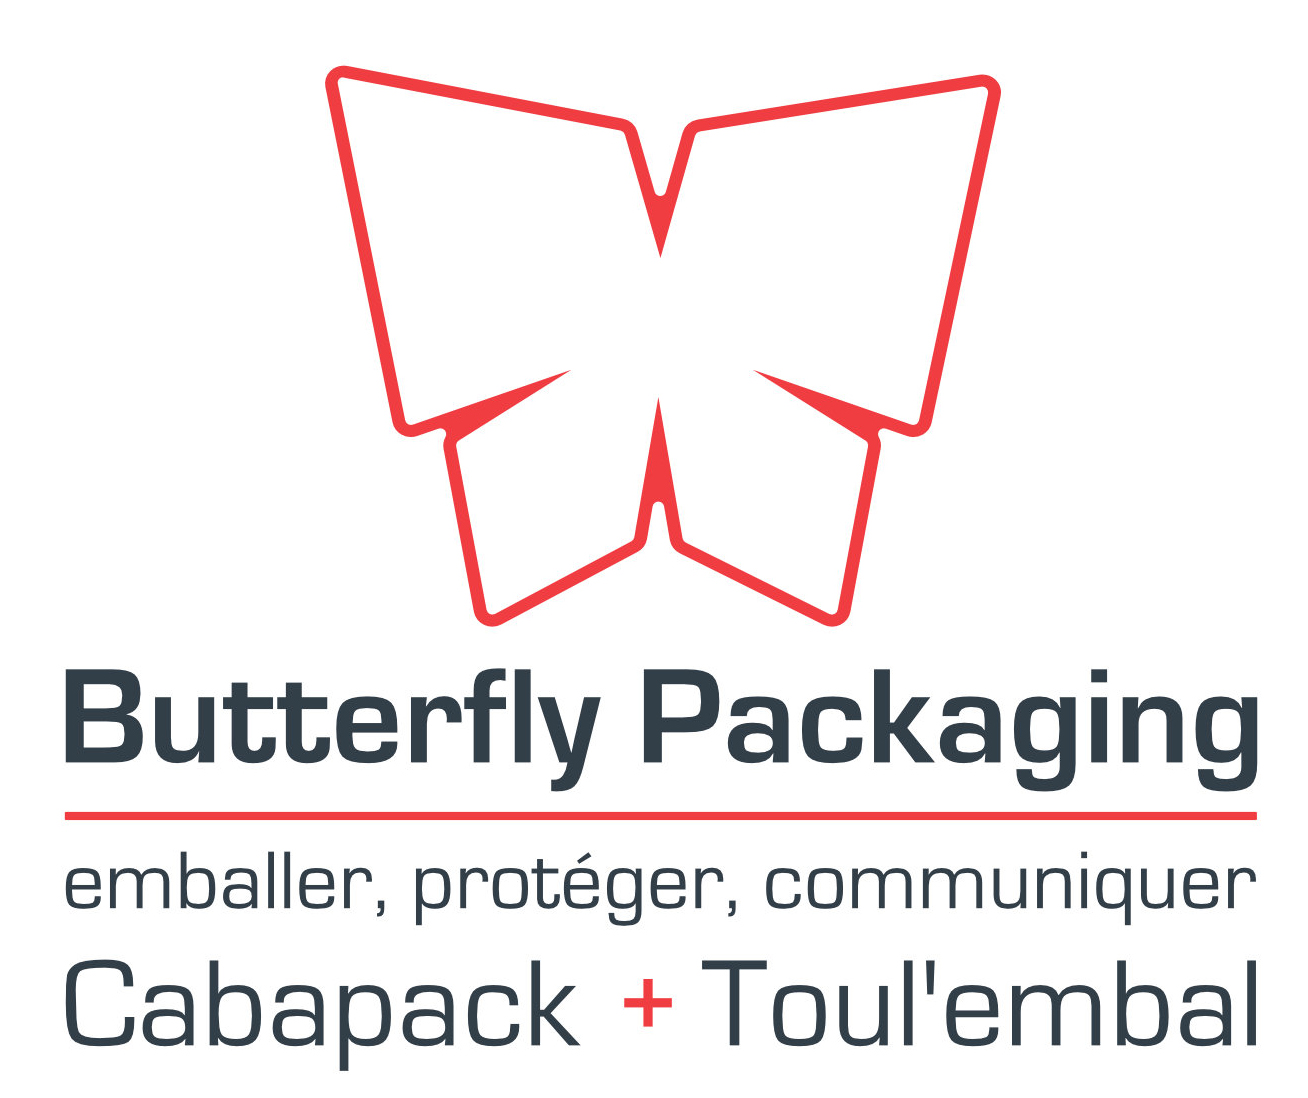 Butterfly packagibng